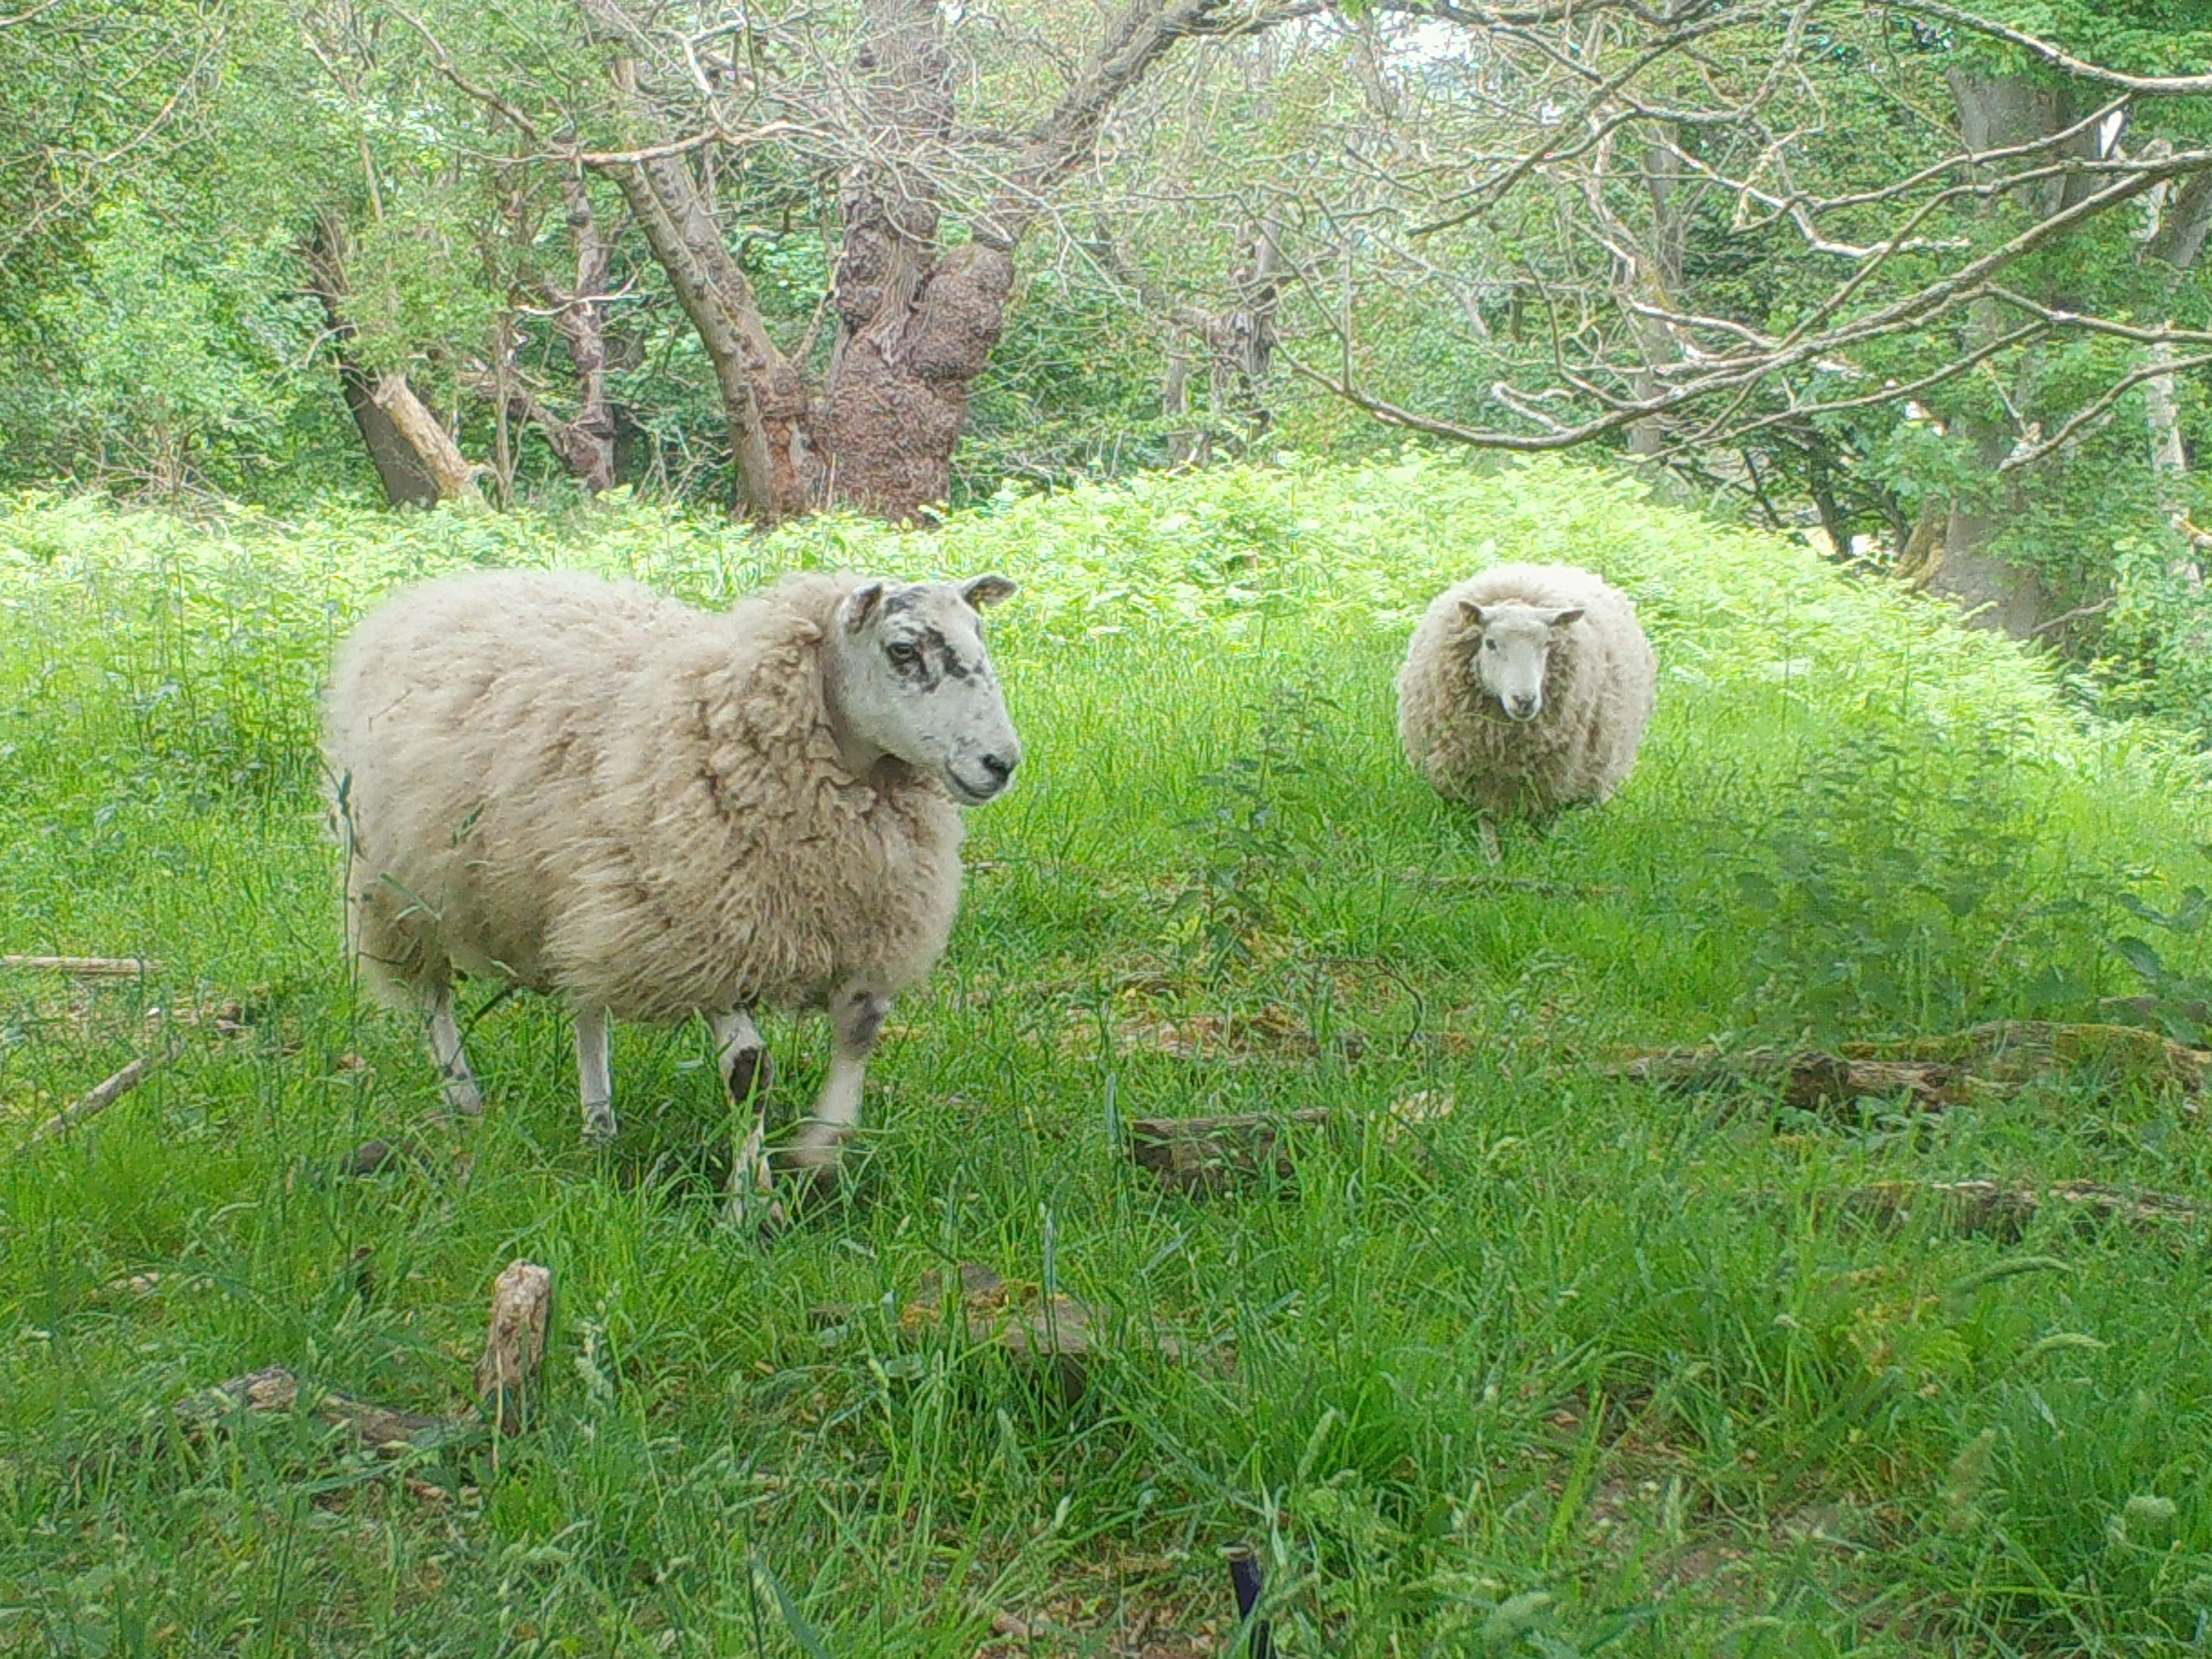 Sheep on the trial site